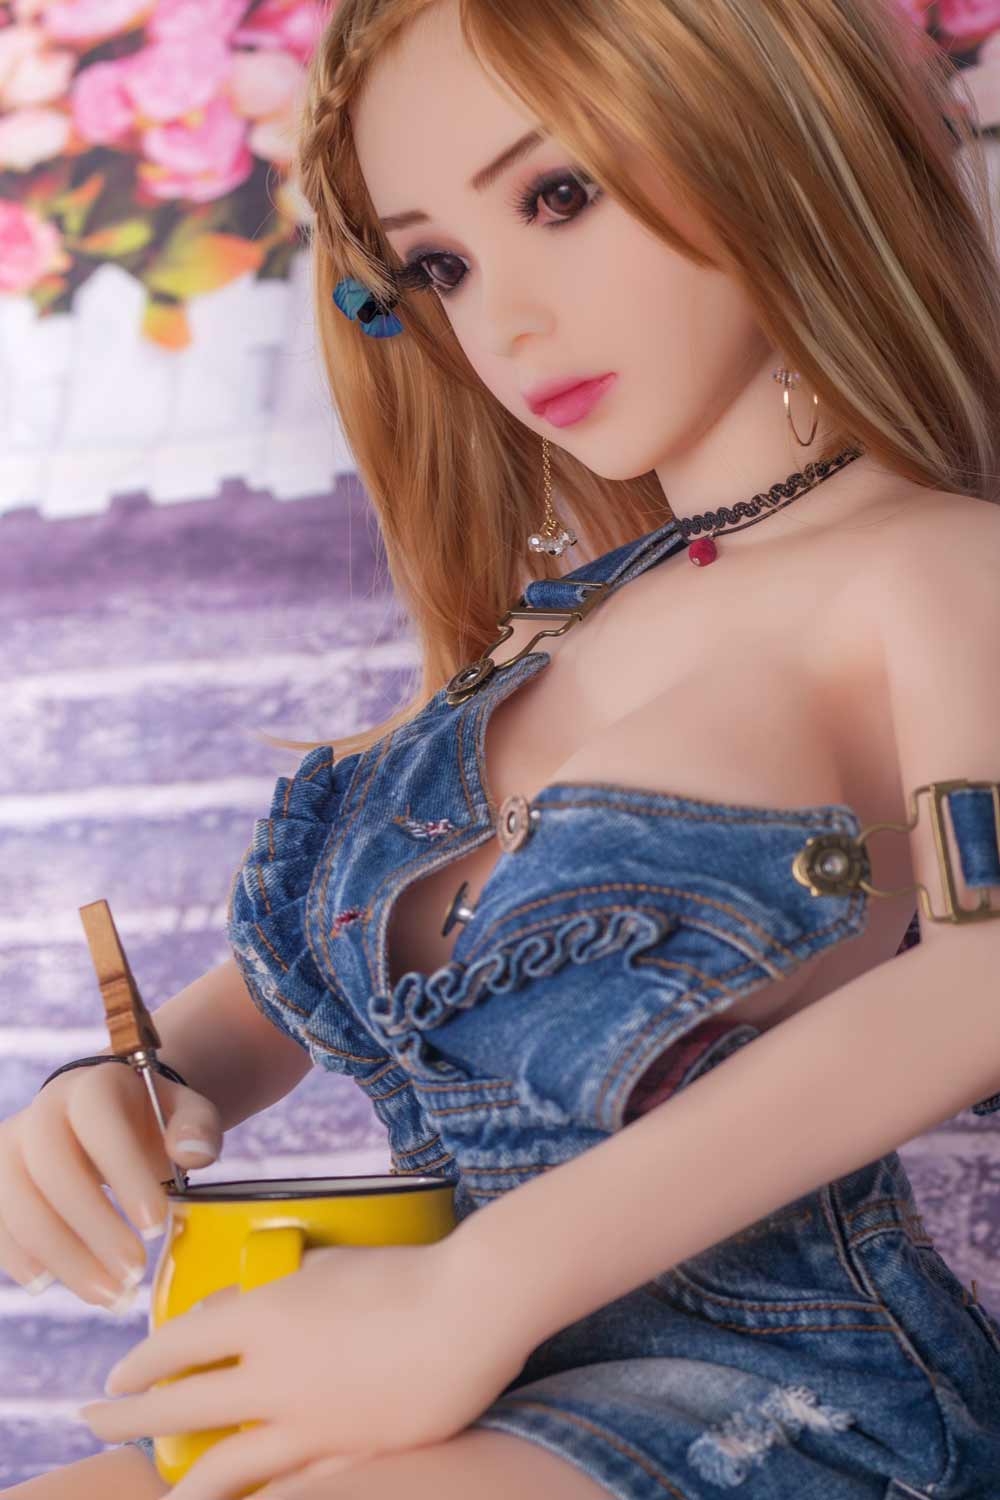 Mini sex doll holding a cup in both hands